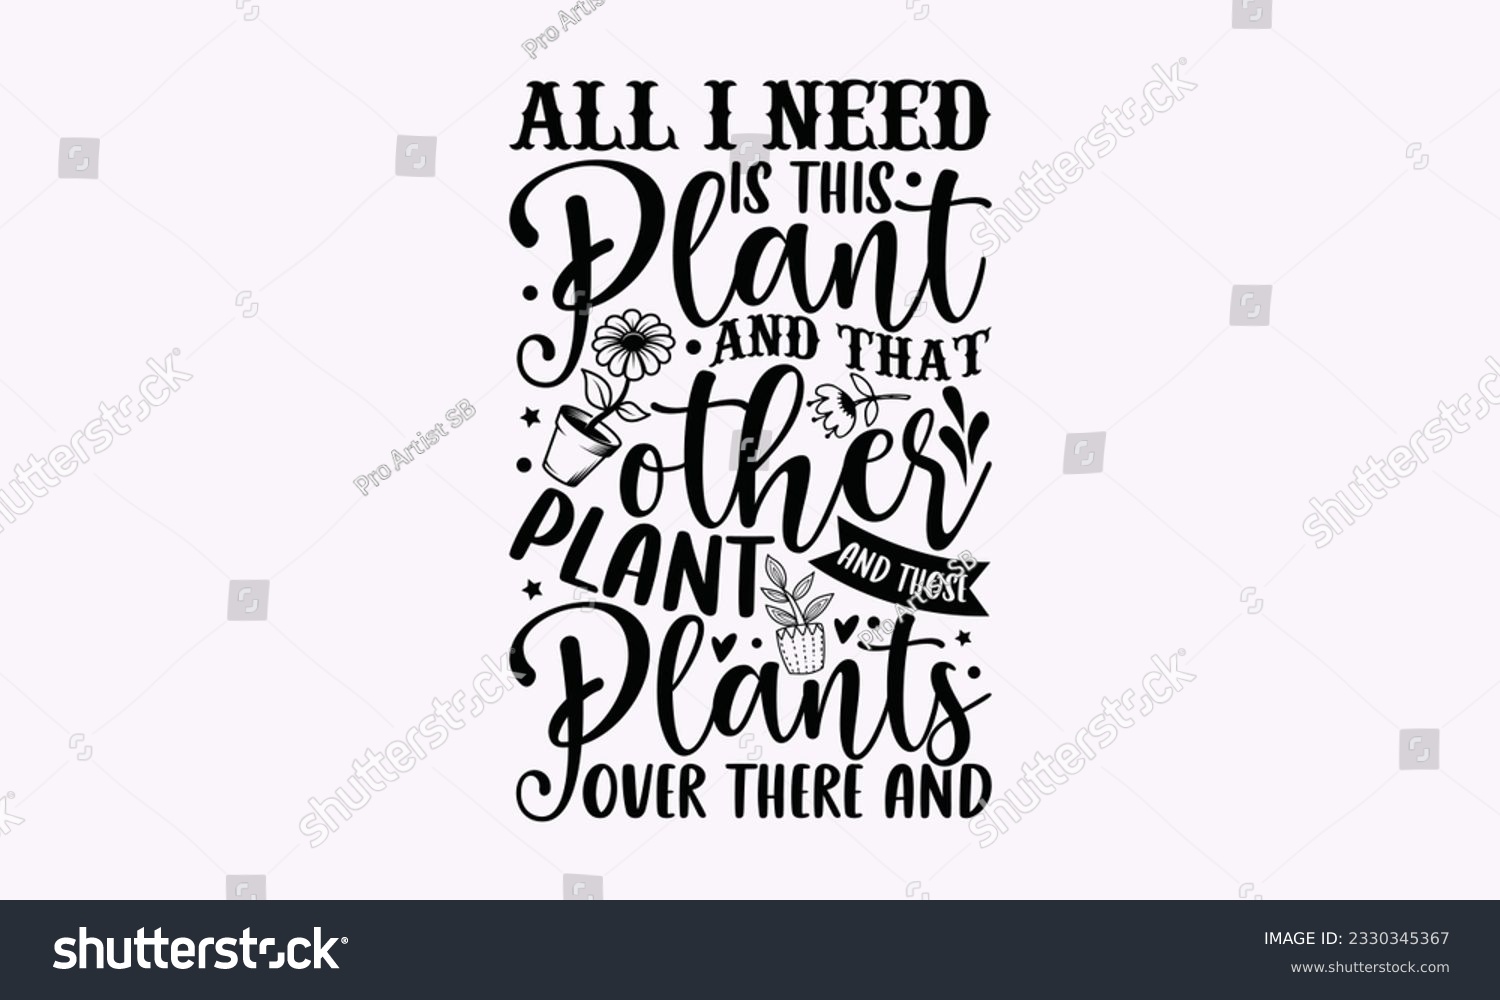 SVG of All I need is this plant and that other plant and those plants over there and - Gardening SVG Design, plant Quotes, Hand drawn lettering phrase, Isolated on white background. svg